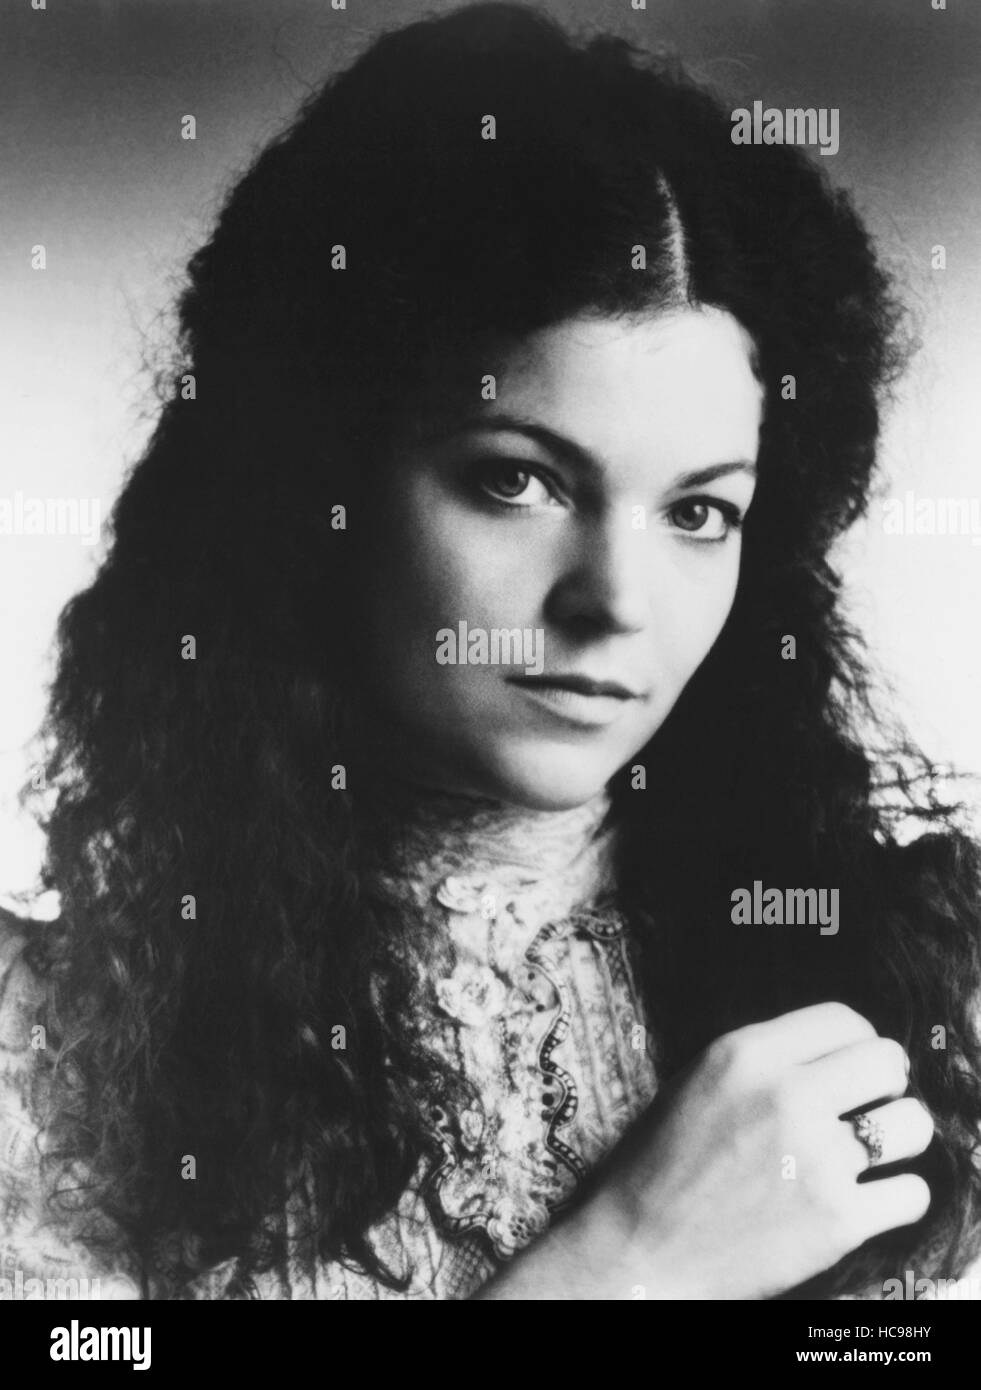 YENTL, Amy Irving, 1983, © United Artists/courtesy Everett Collection ...